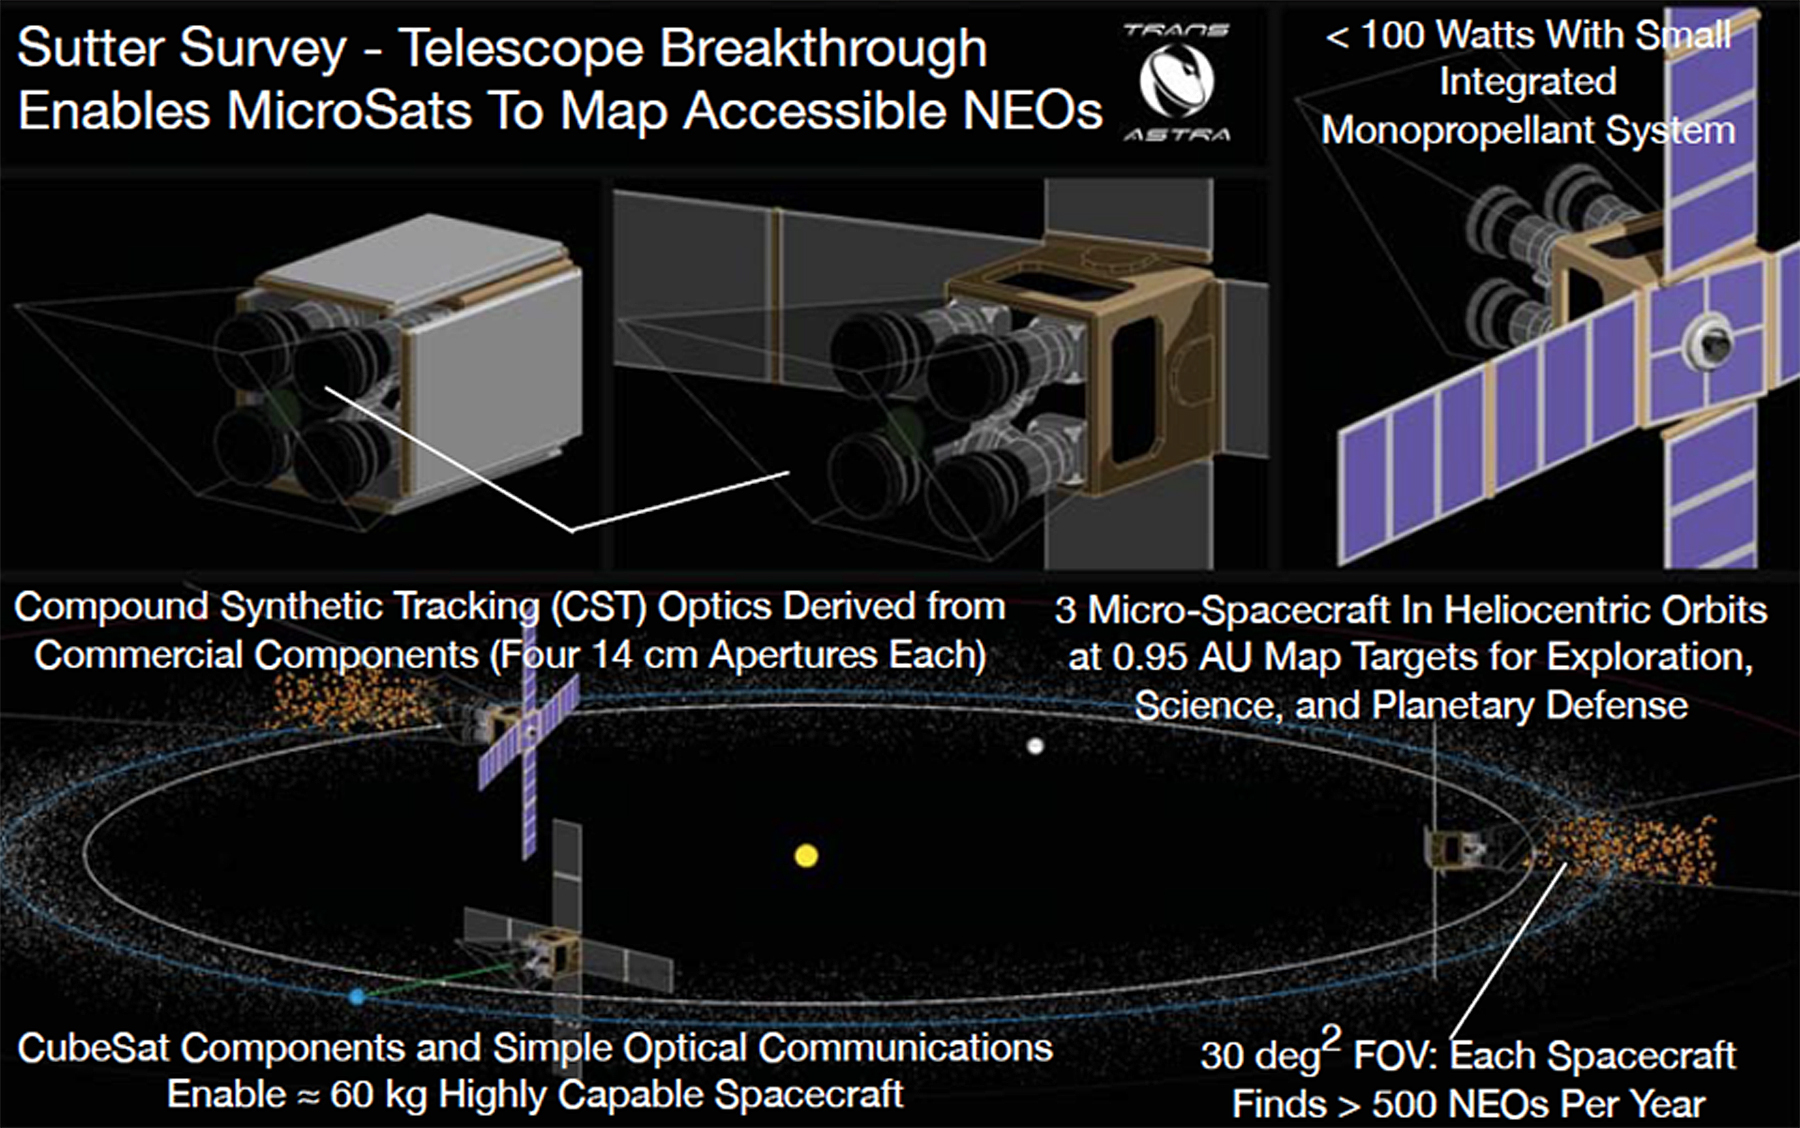 Breakthrough Telescope Innovation for Asteroid Survey Missions